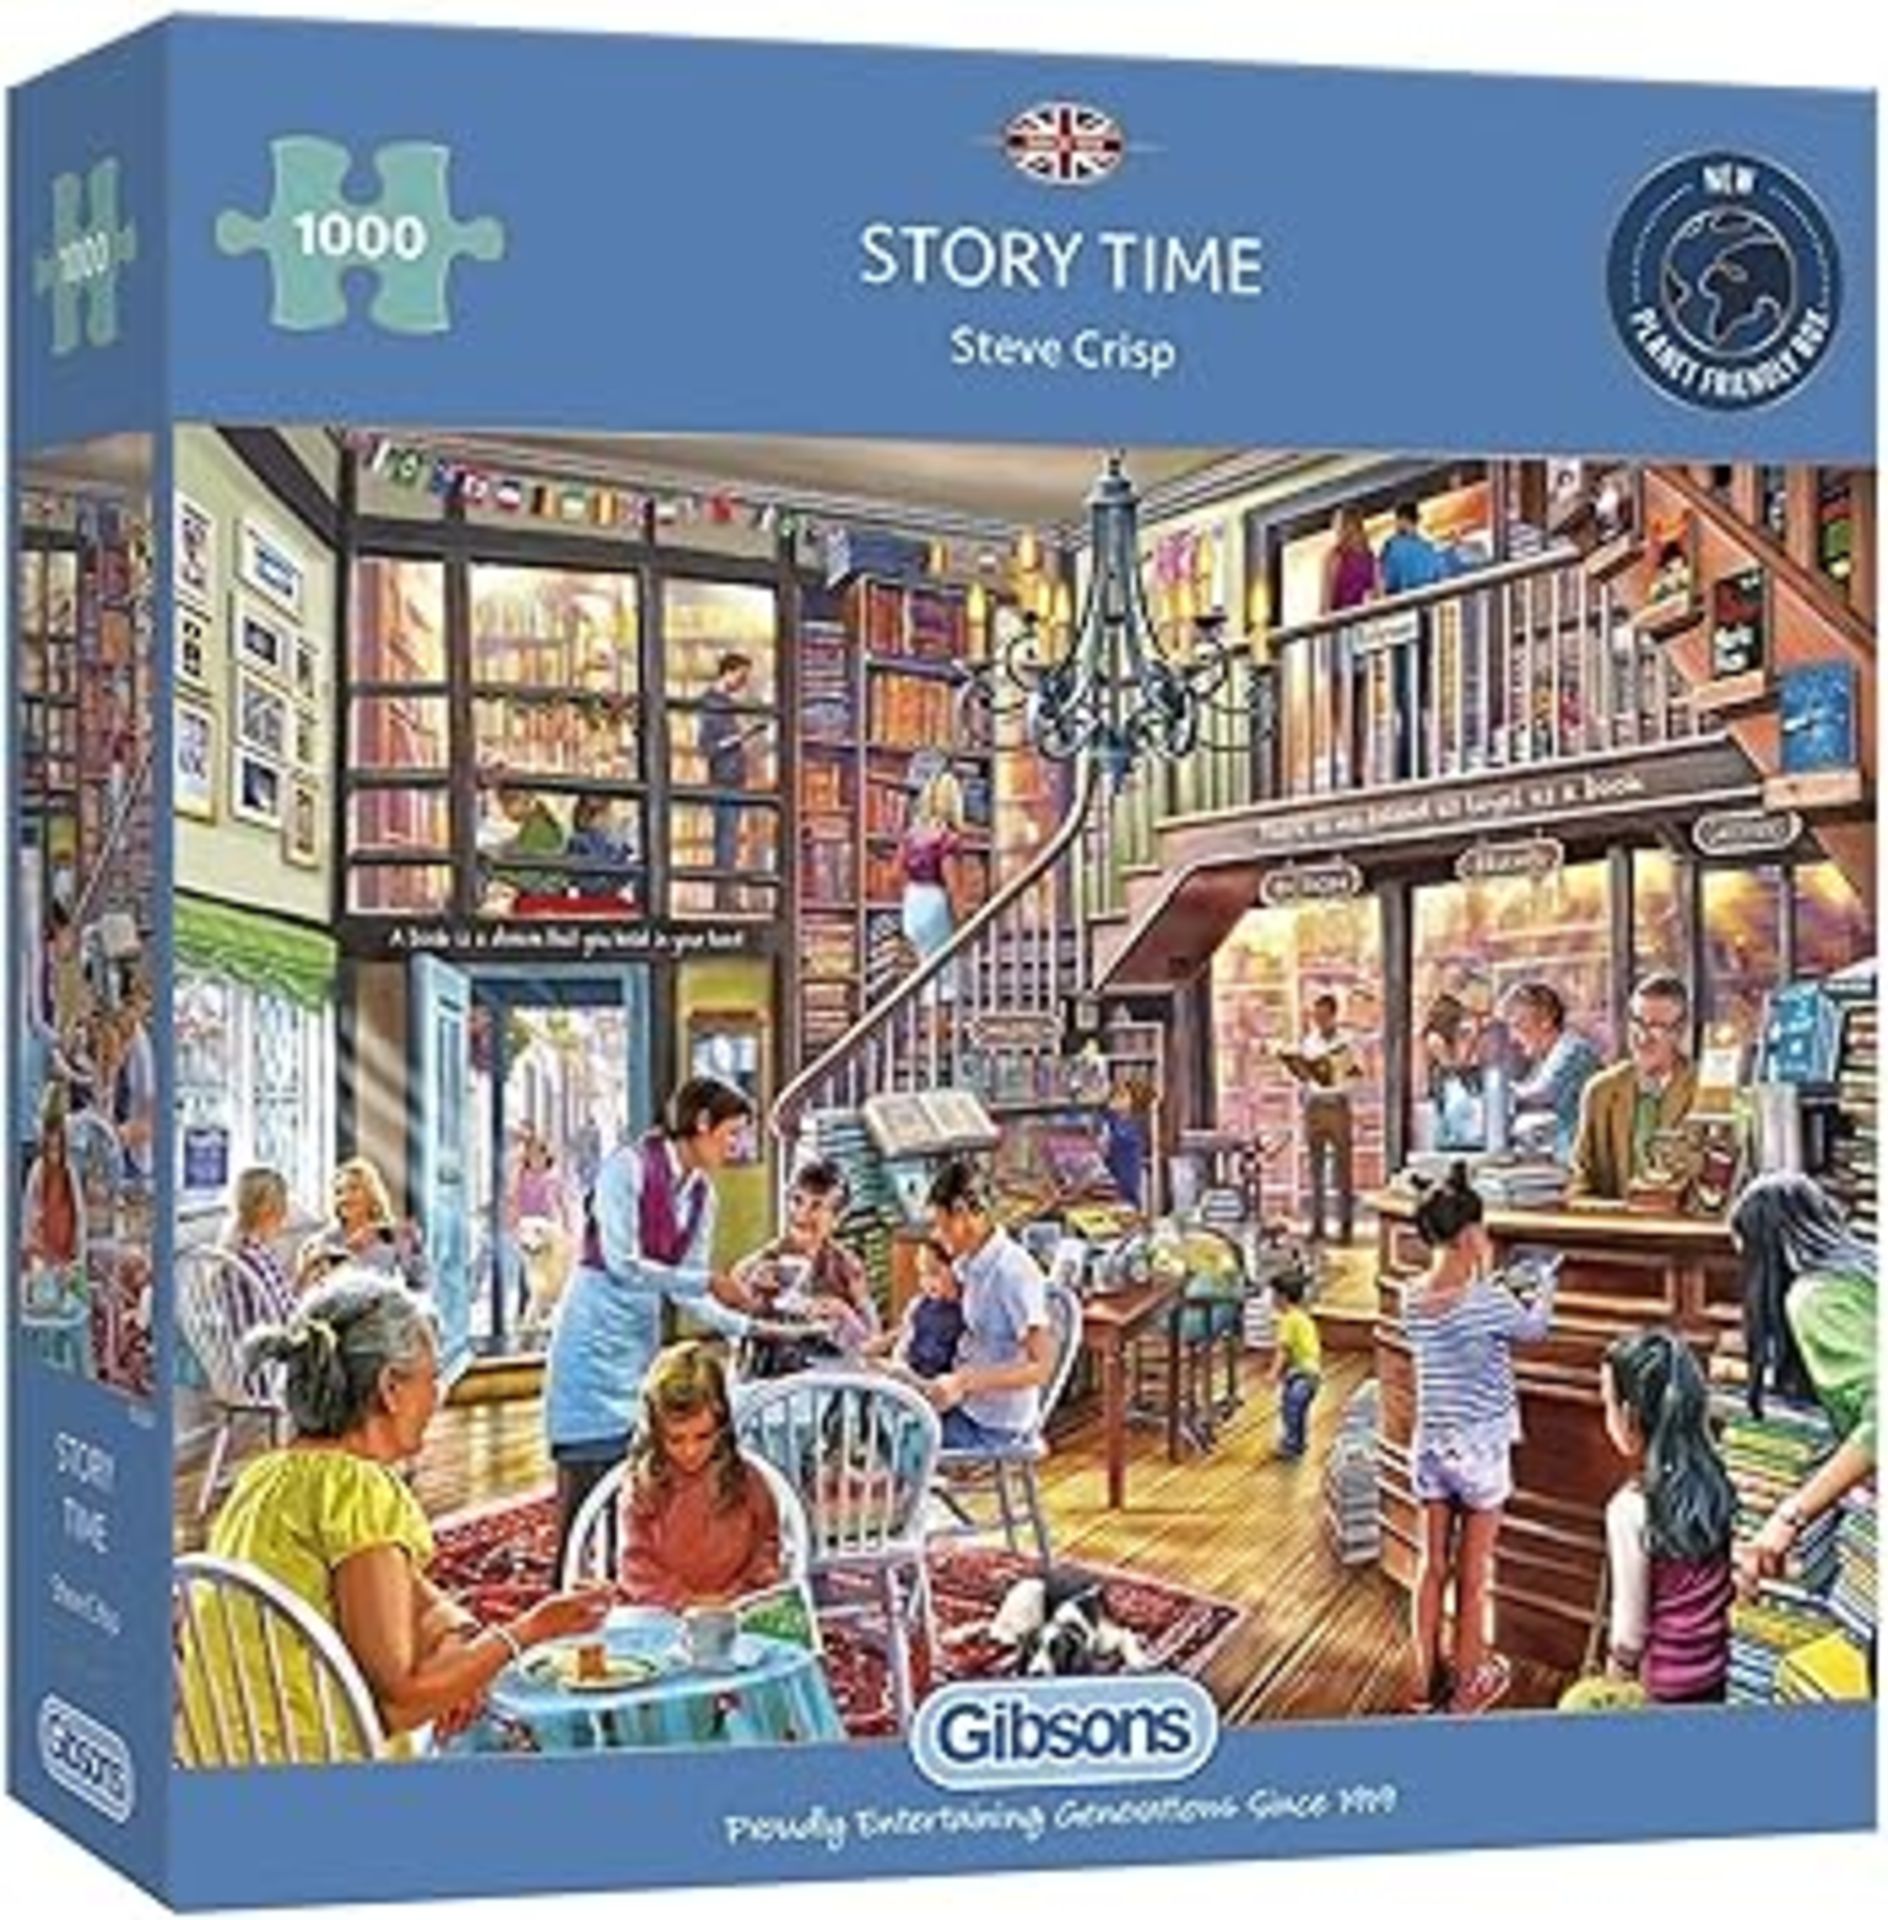 432 X NEW STORY TIME 1000 PIECE JIGSAW PUZZLE - Image 2 of 2